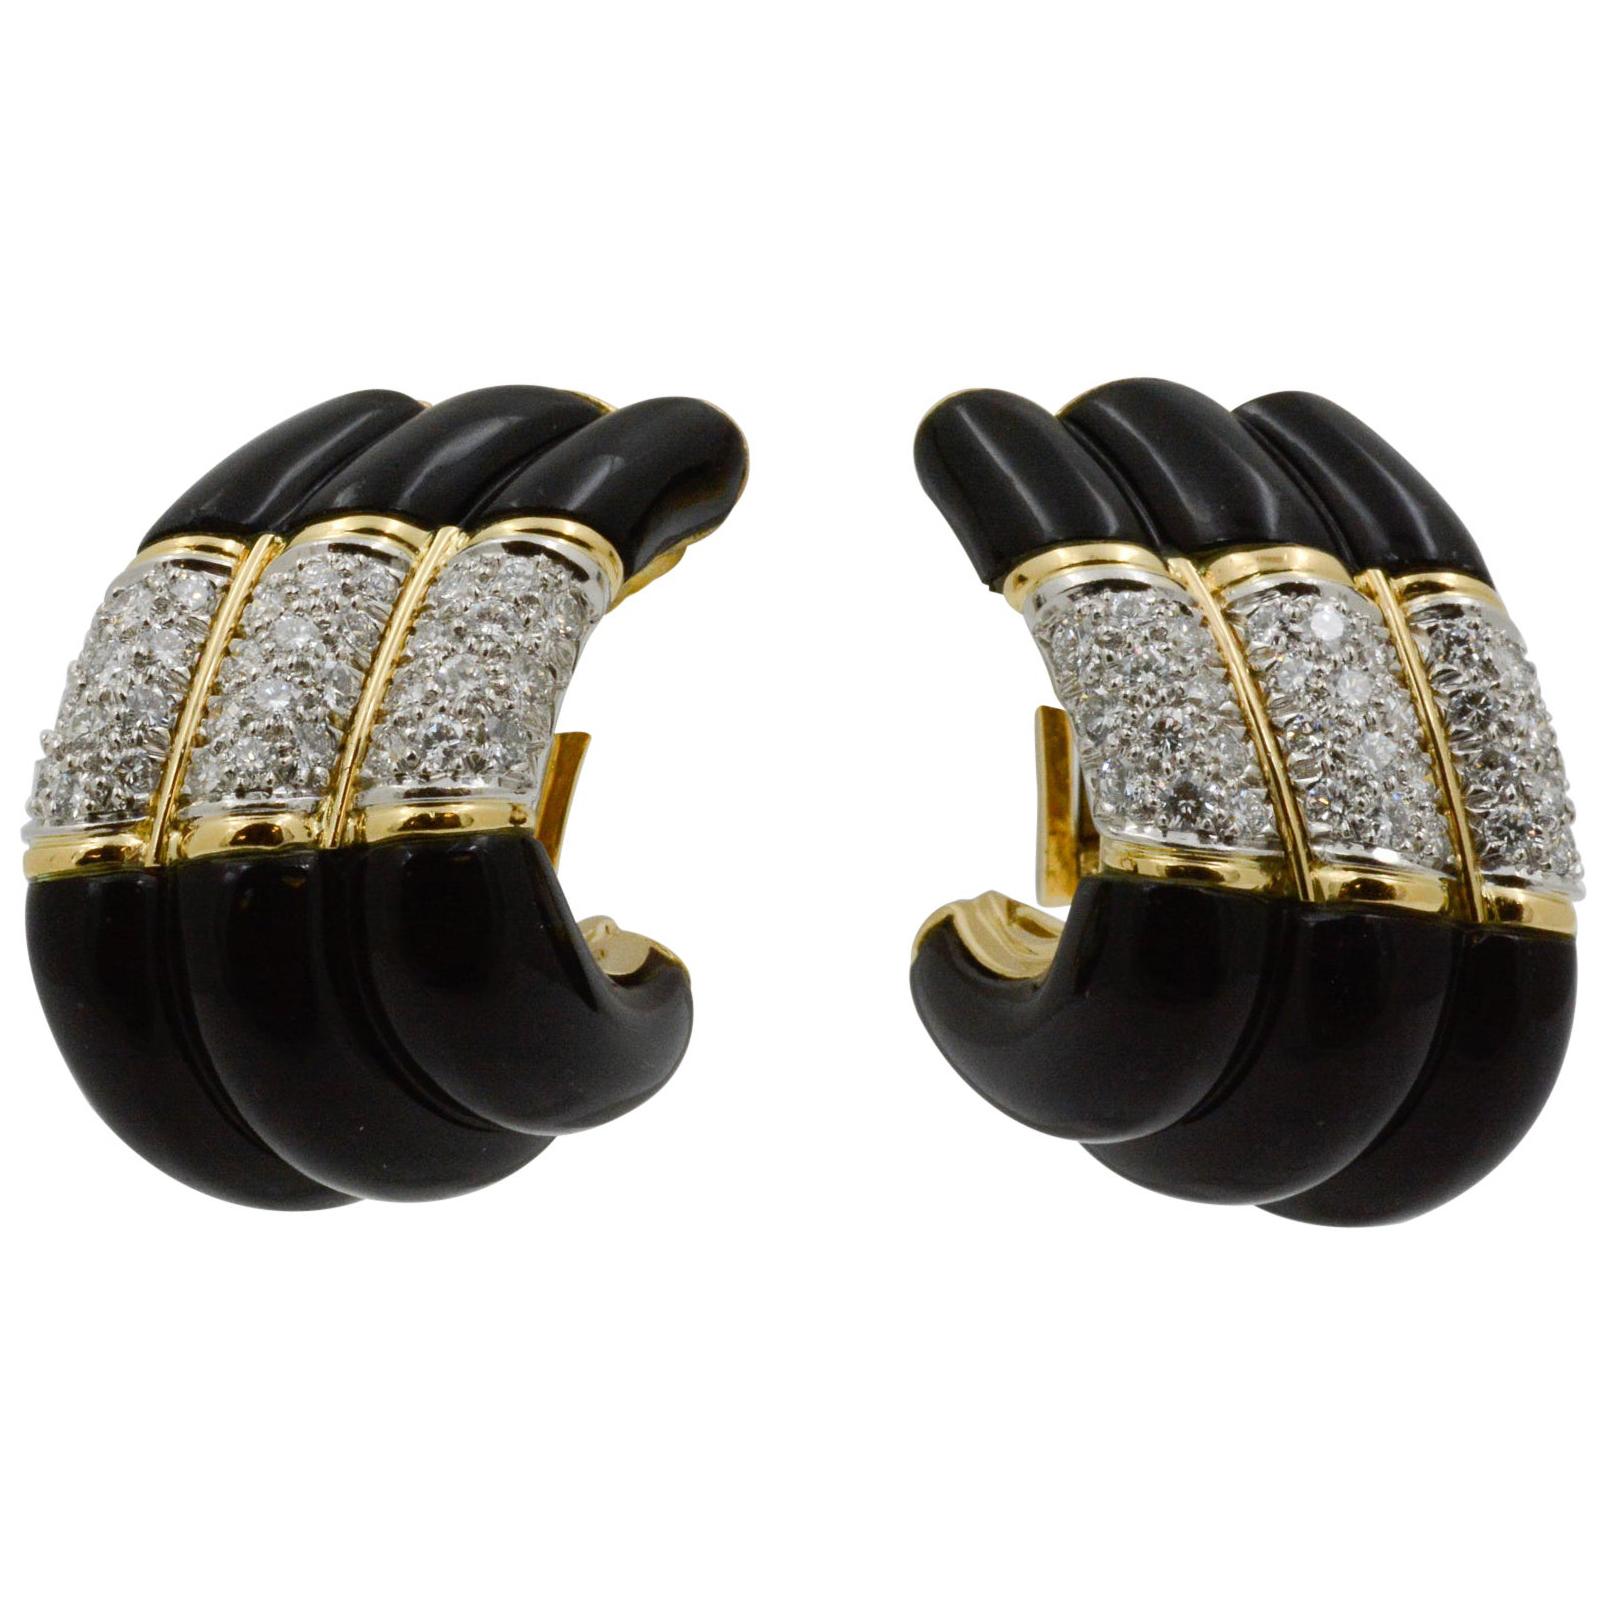 Exclusively from the Eiseman Estate Jewelry Collection, these Charles Turi 18k yellow gold earrings feature three black onyx panels and are accented by 66 round brilliant cut diamonds weighing 1.75 carats with G-H color and VS clarity. 